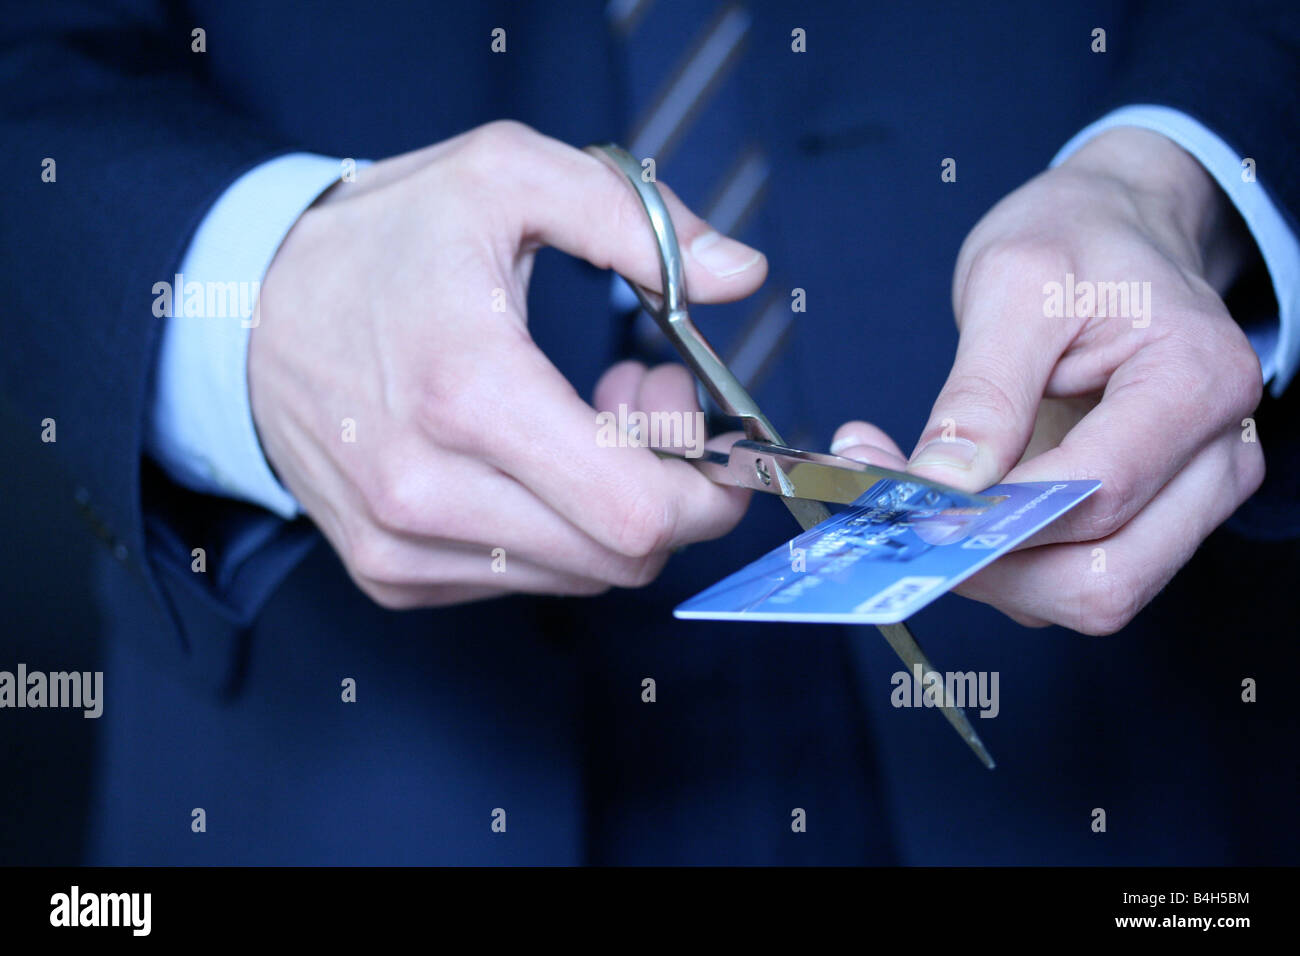 Midsection view of businessman cutting credit card with scissors Stock Photo